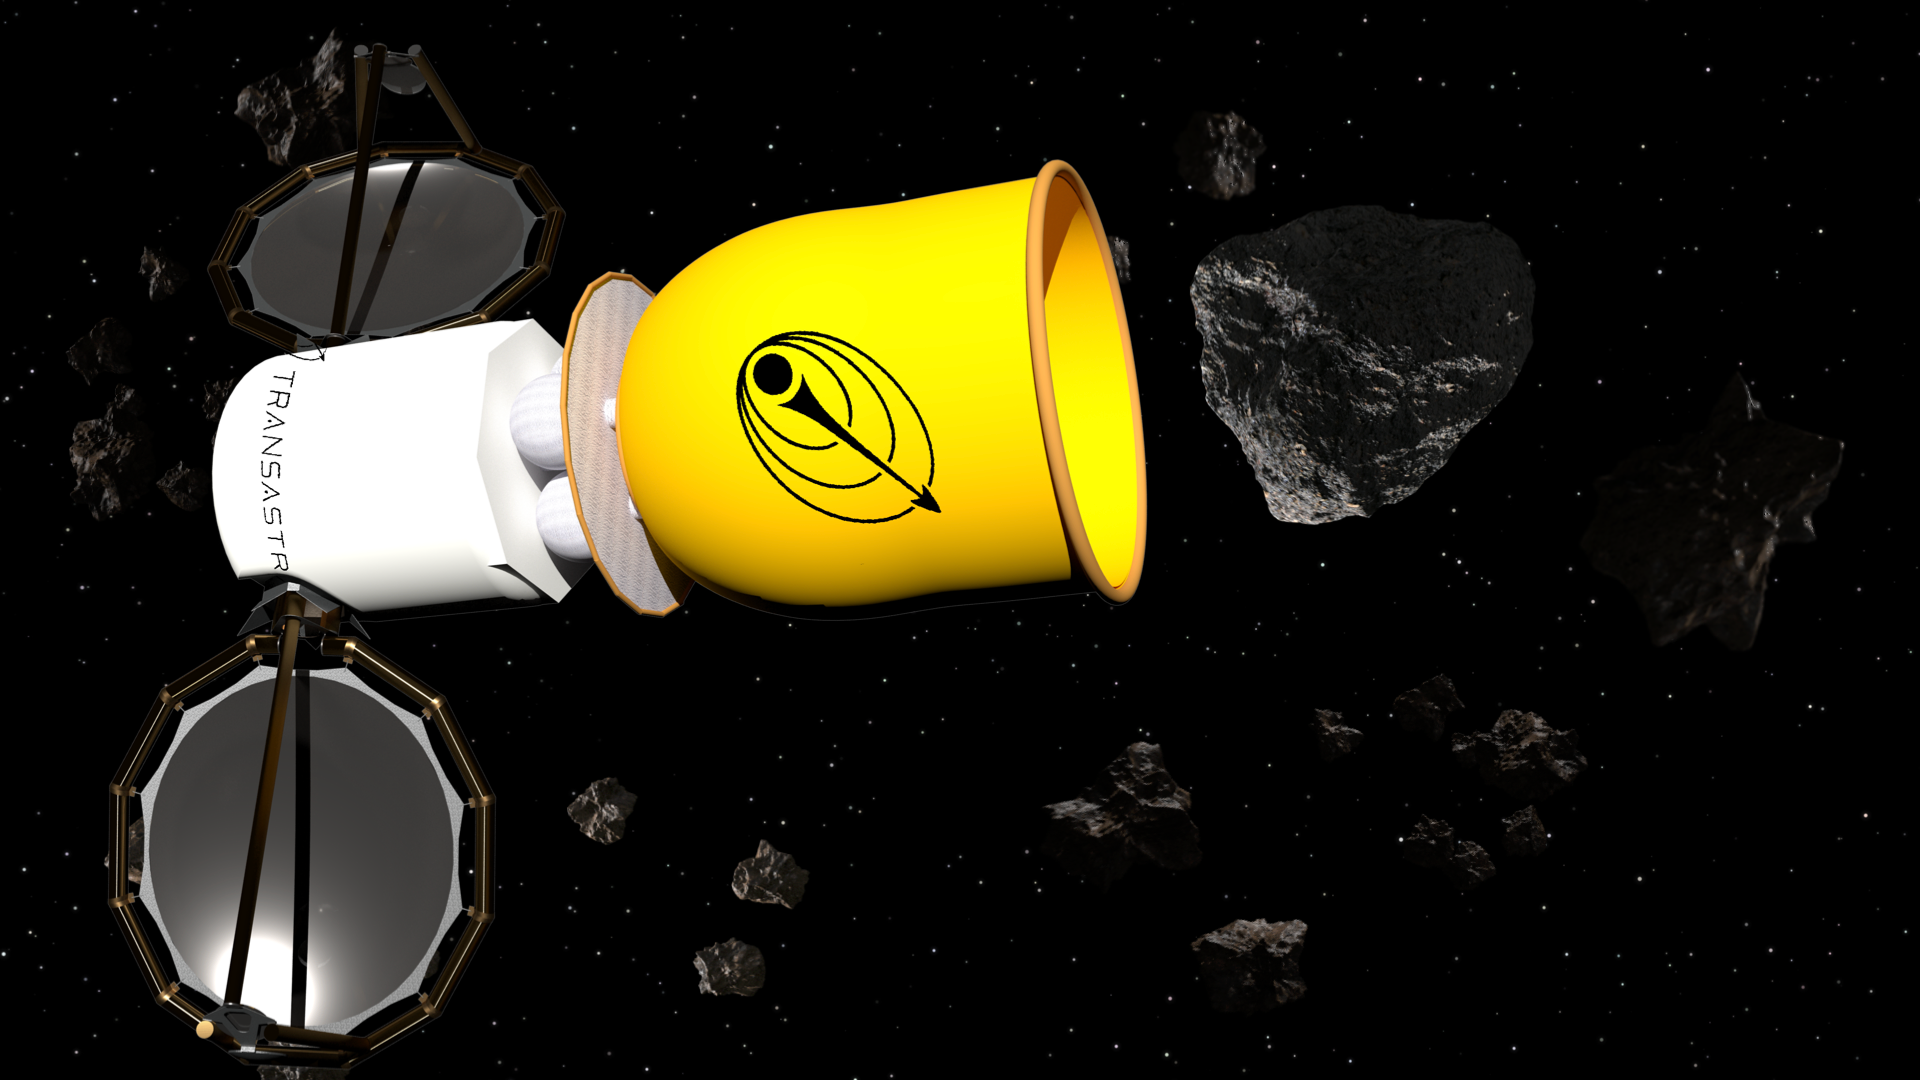 A conceptual illustration of the Transastra worker bee craft on its first asteroid mining flight mission.